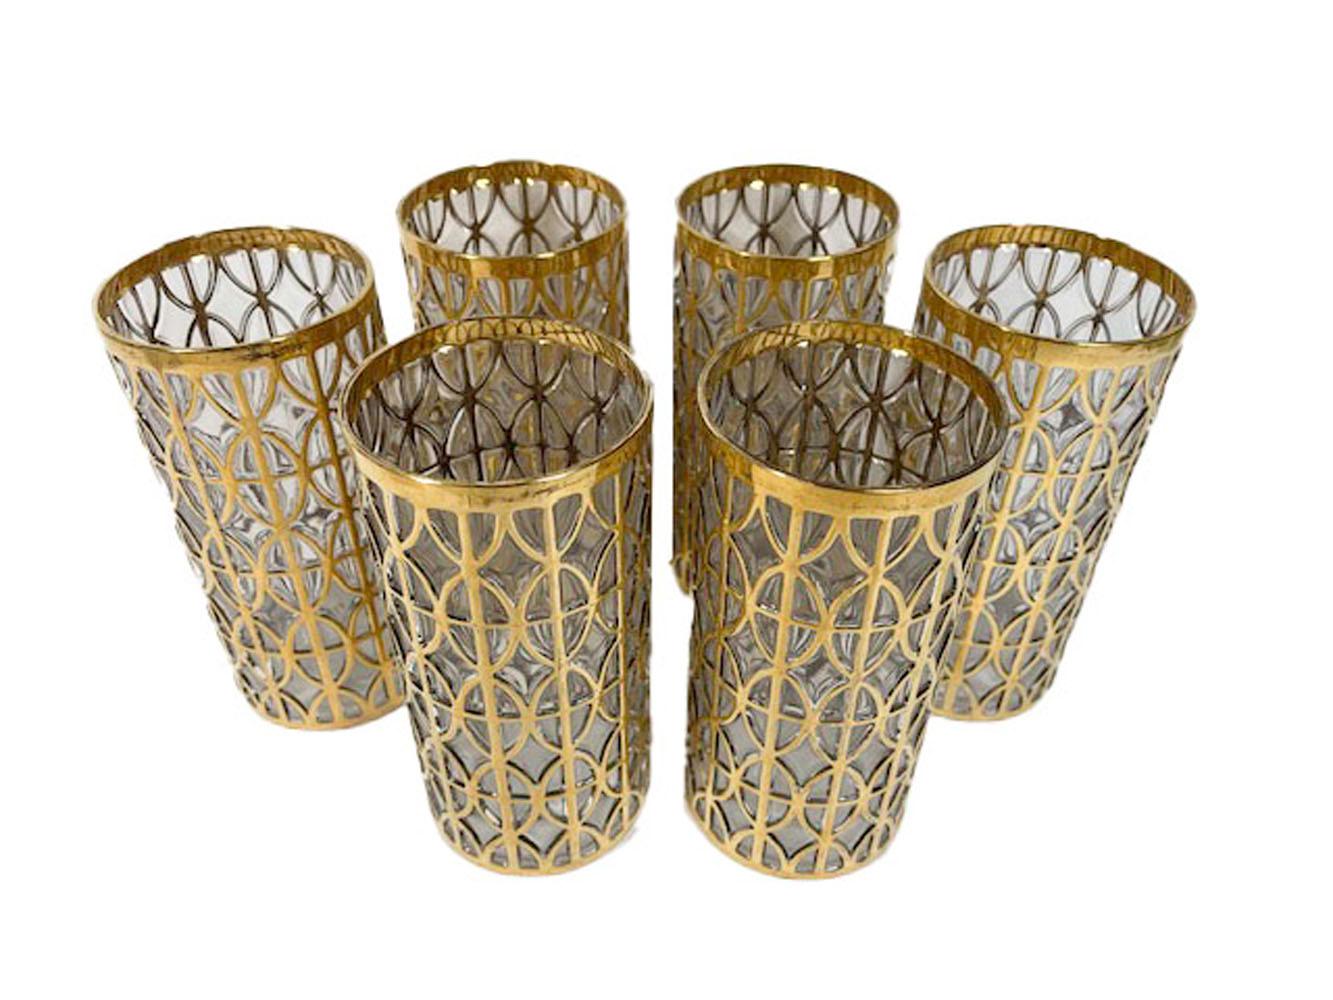 Six Mid-Century Modern highball glasses in the 'Tabique de Oro' pattern by Imperial Glassware Company. This pattern has a blown-out pattern of overlapped ovals and squares forming geometric patterns of raised lines which are cobered in 22 karat